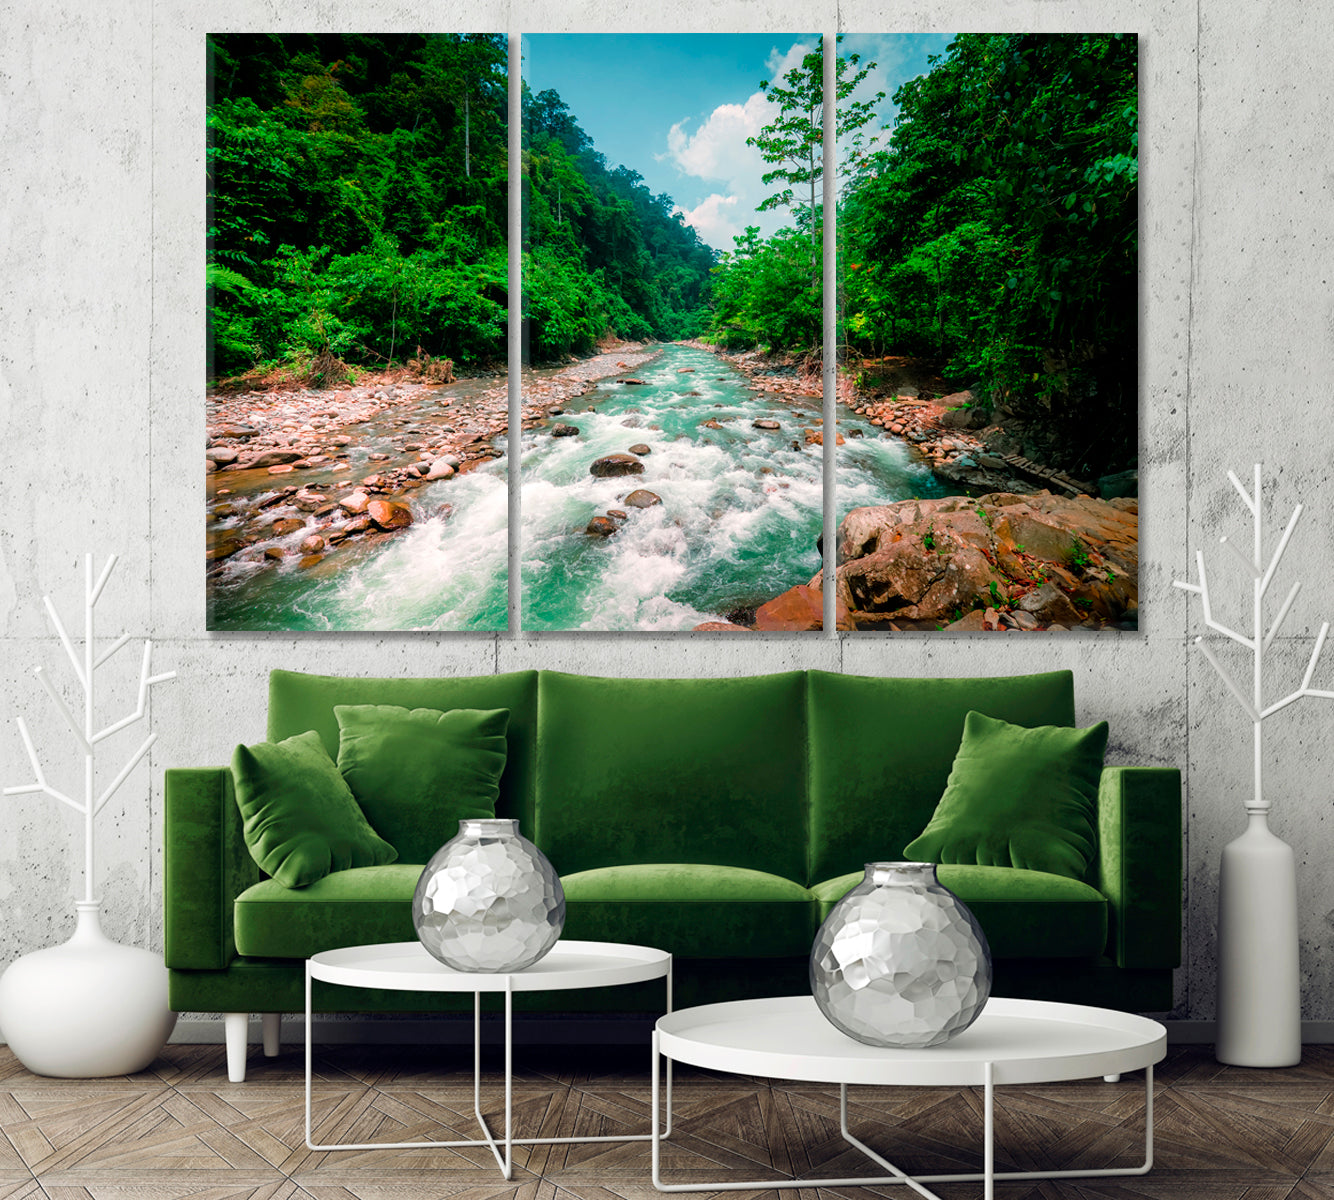 Magical Scenery of Rainforest and River with Rocks Canvas Print-Canvas Print-CetArt-1 Panel-24x16 inches-CetArt